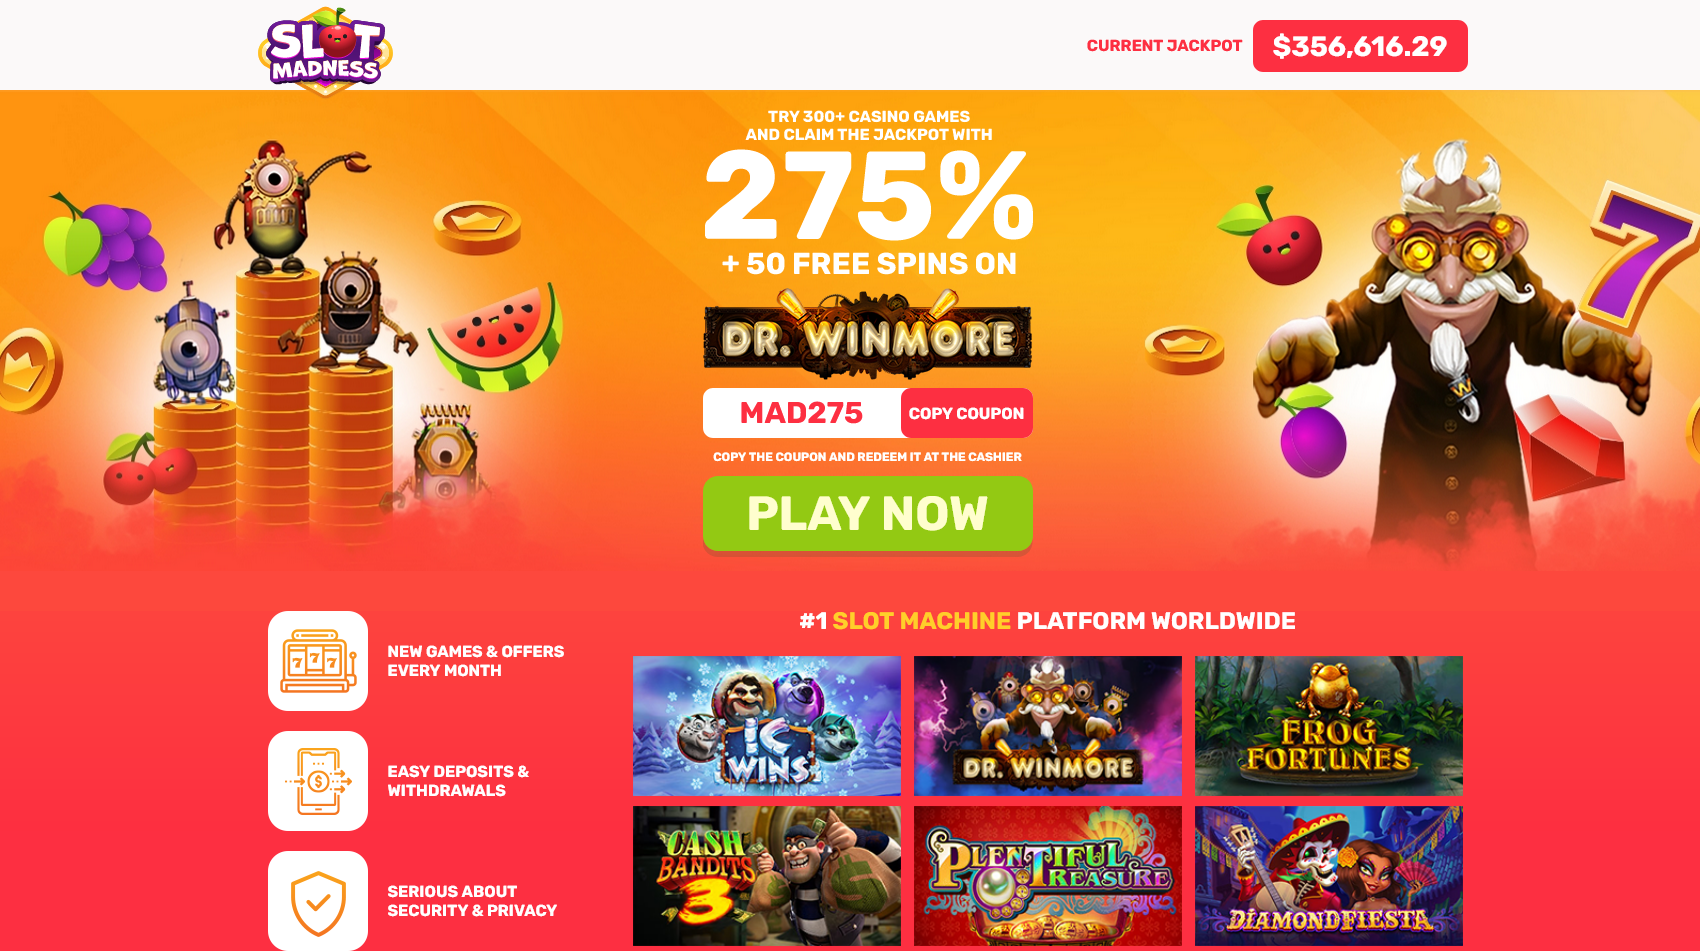 Slot Madness/275% +50 Free Spins